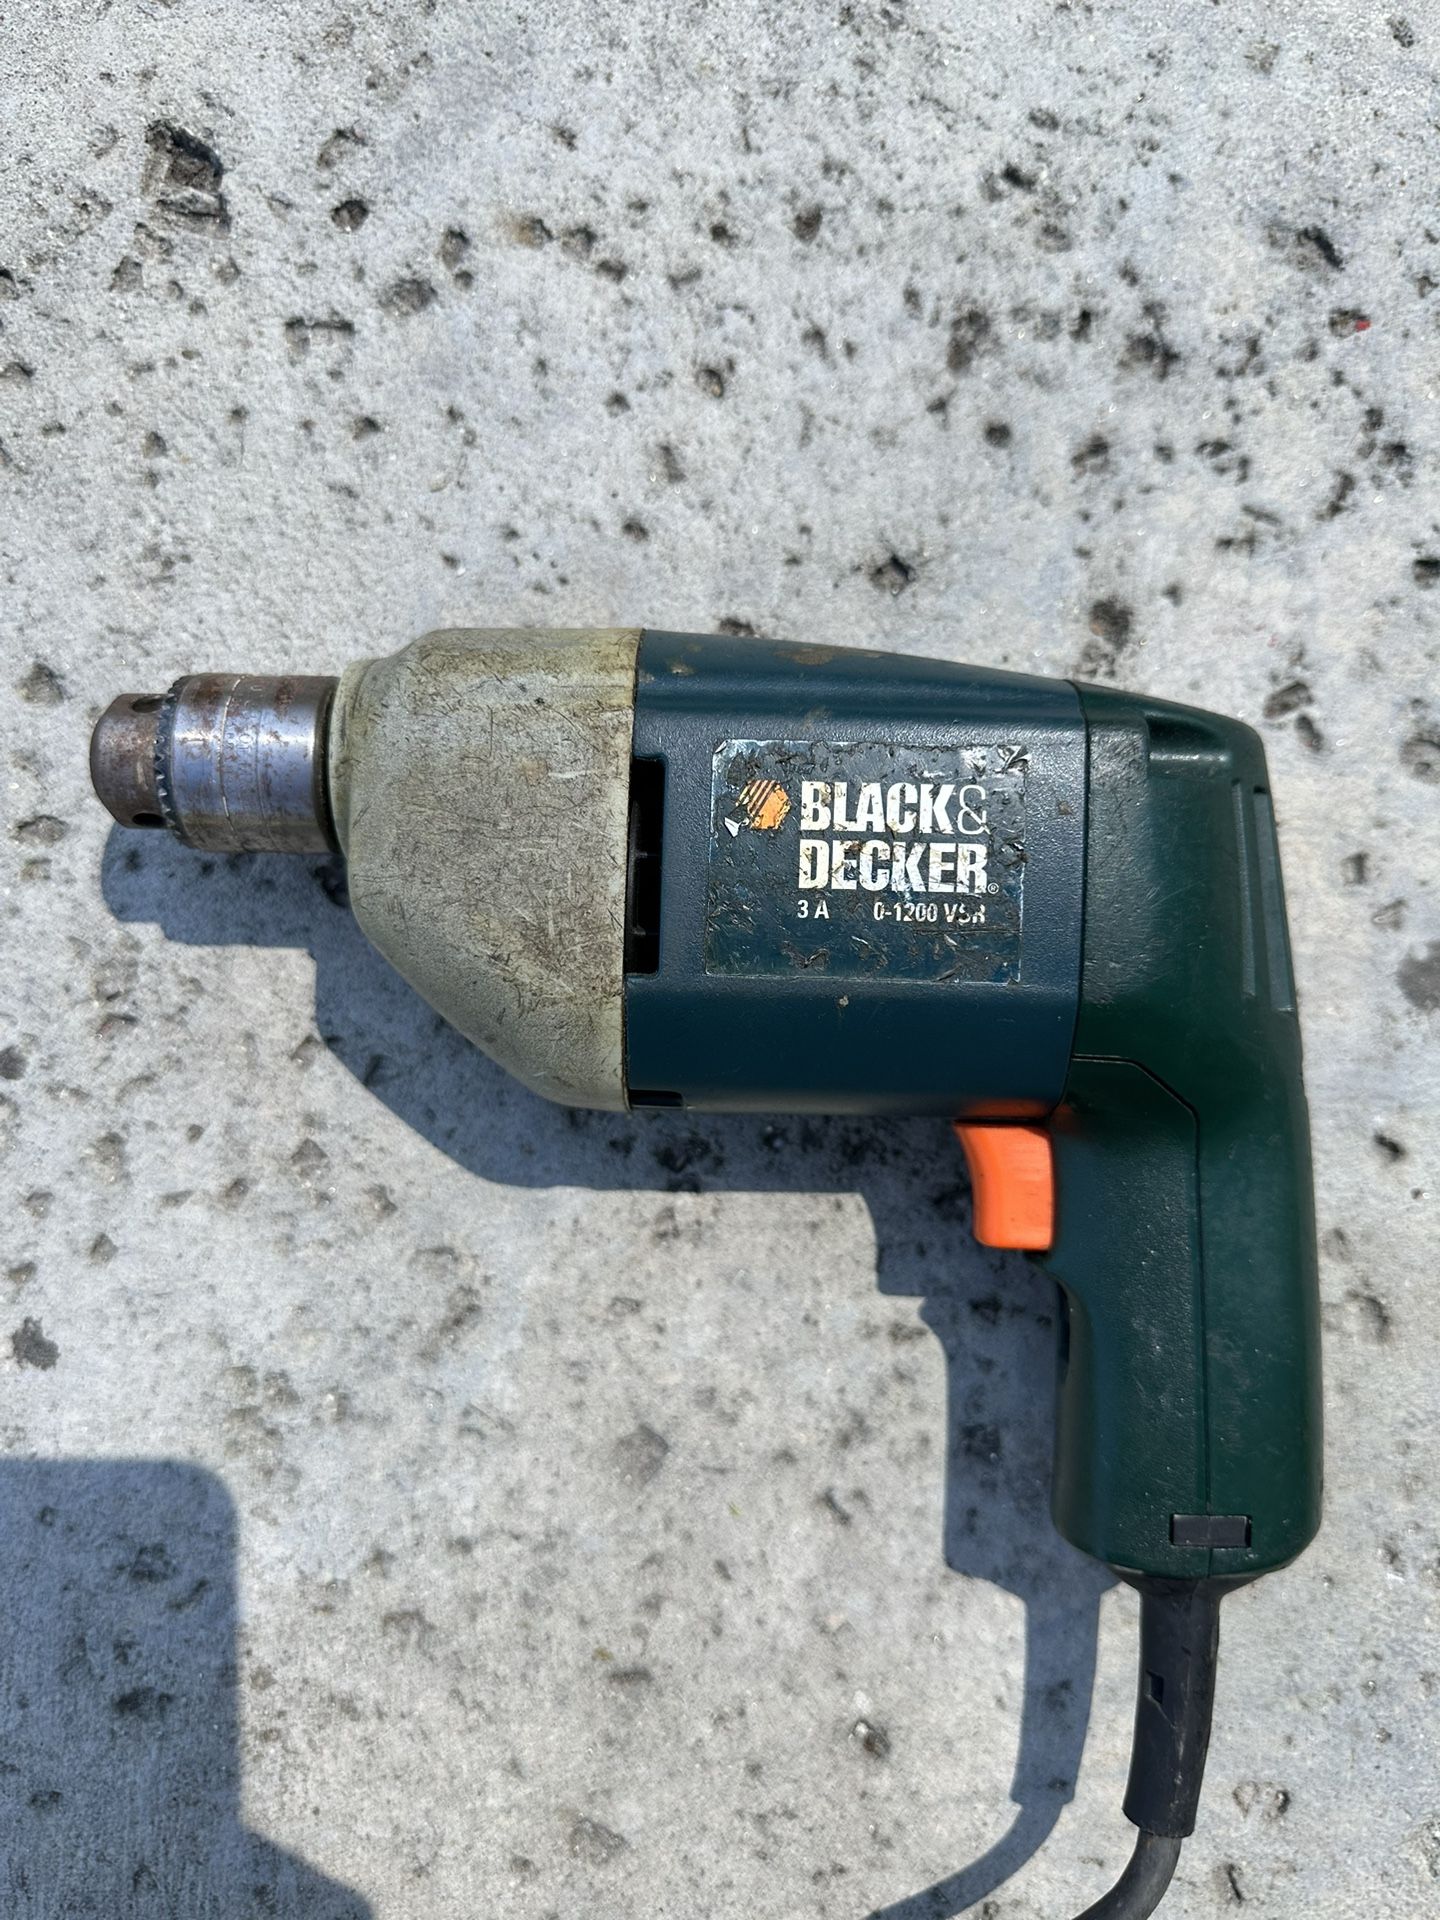 Black And Decker 3A 1200 RPM Corded Drill For Sale!